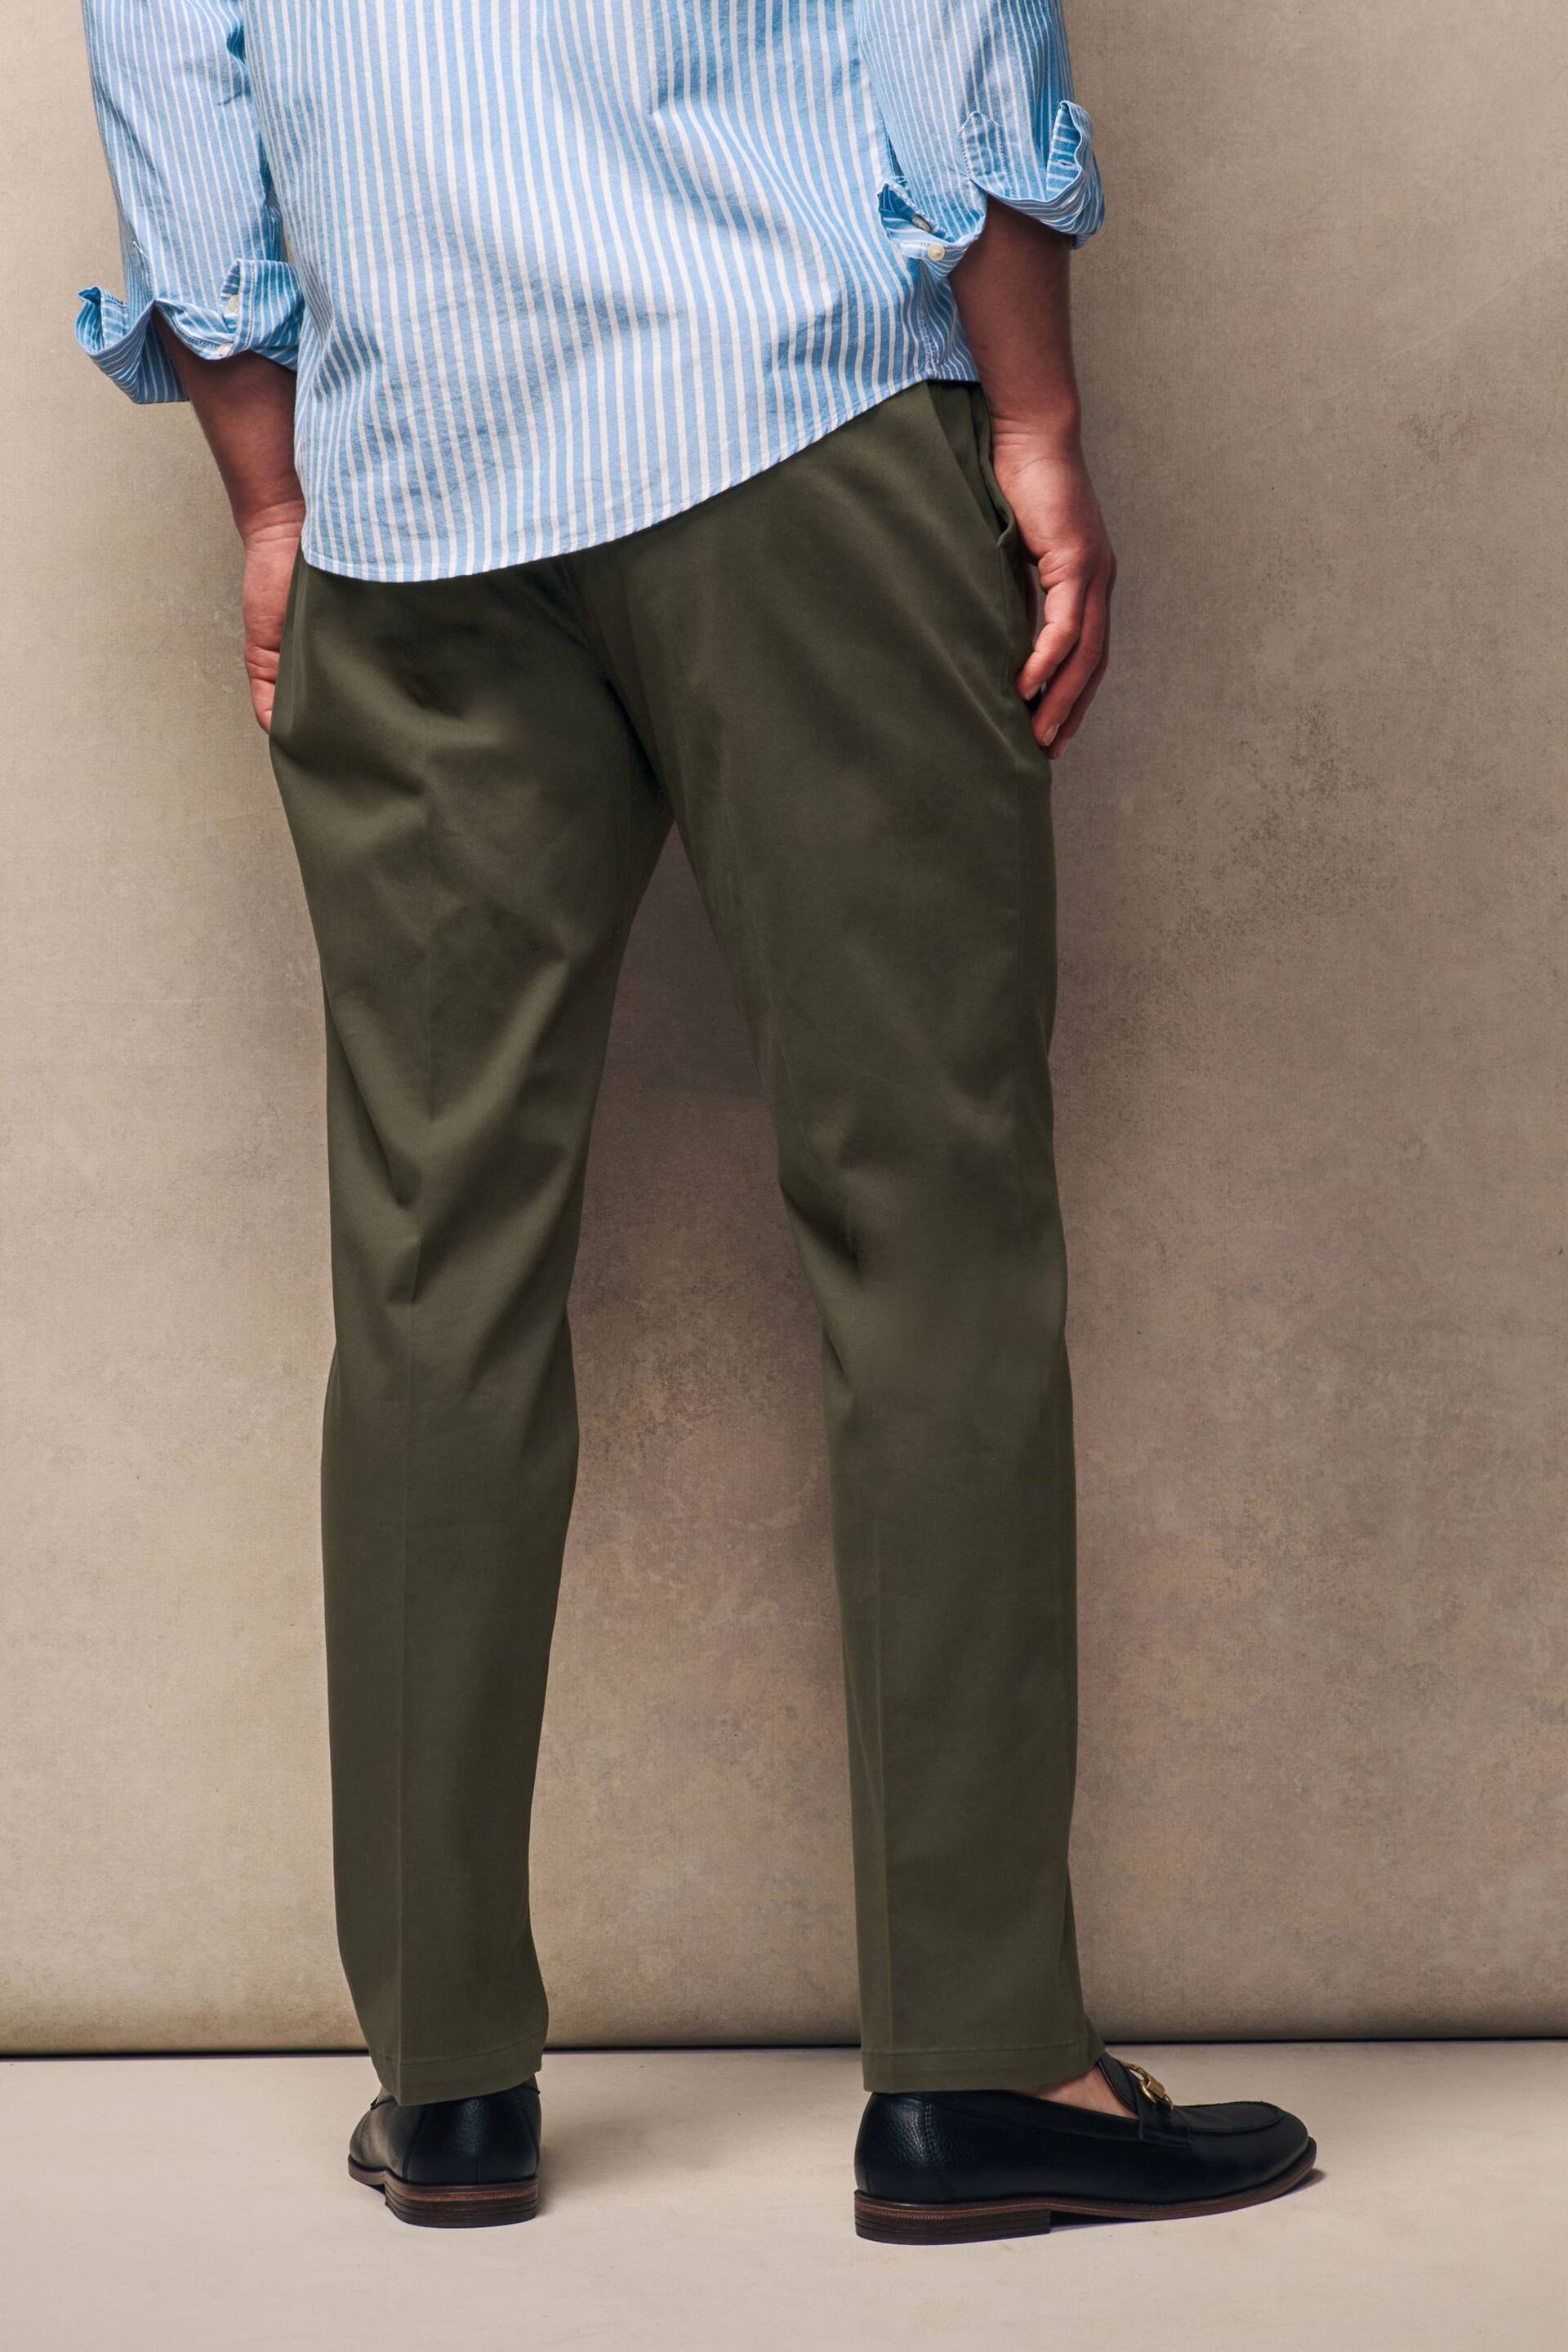 Khaki Green Slim Fit Stretch Sateen Chino Trousers - Image 4 of 11